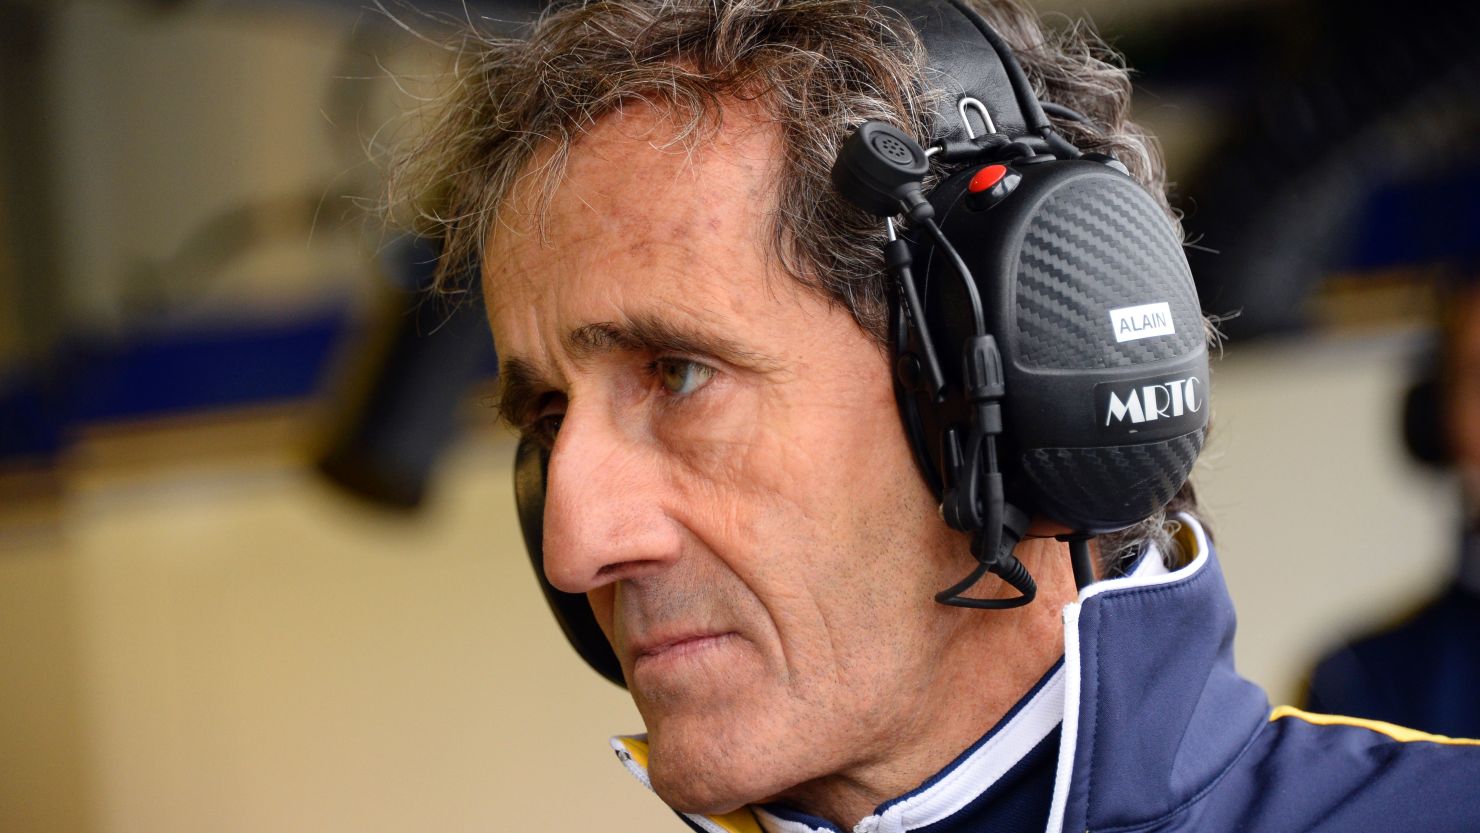 Four-time F1 champion Alain Prost is now focused on winning the Formula E title with Renault.